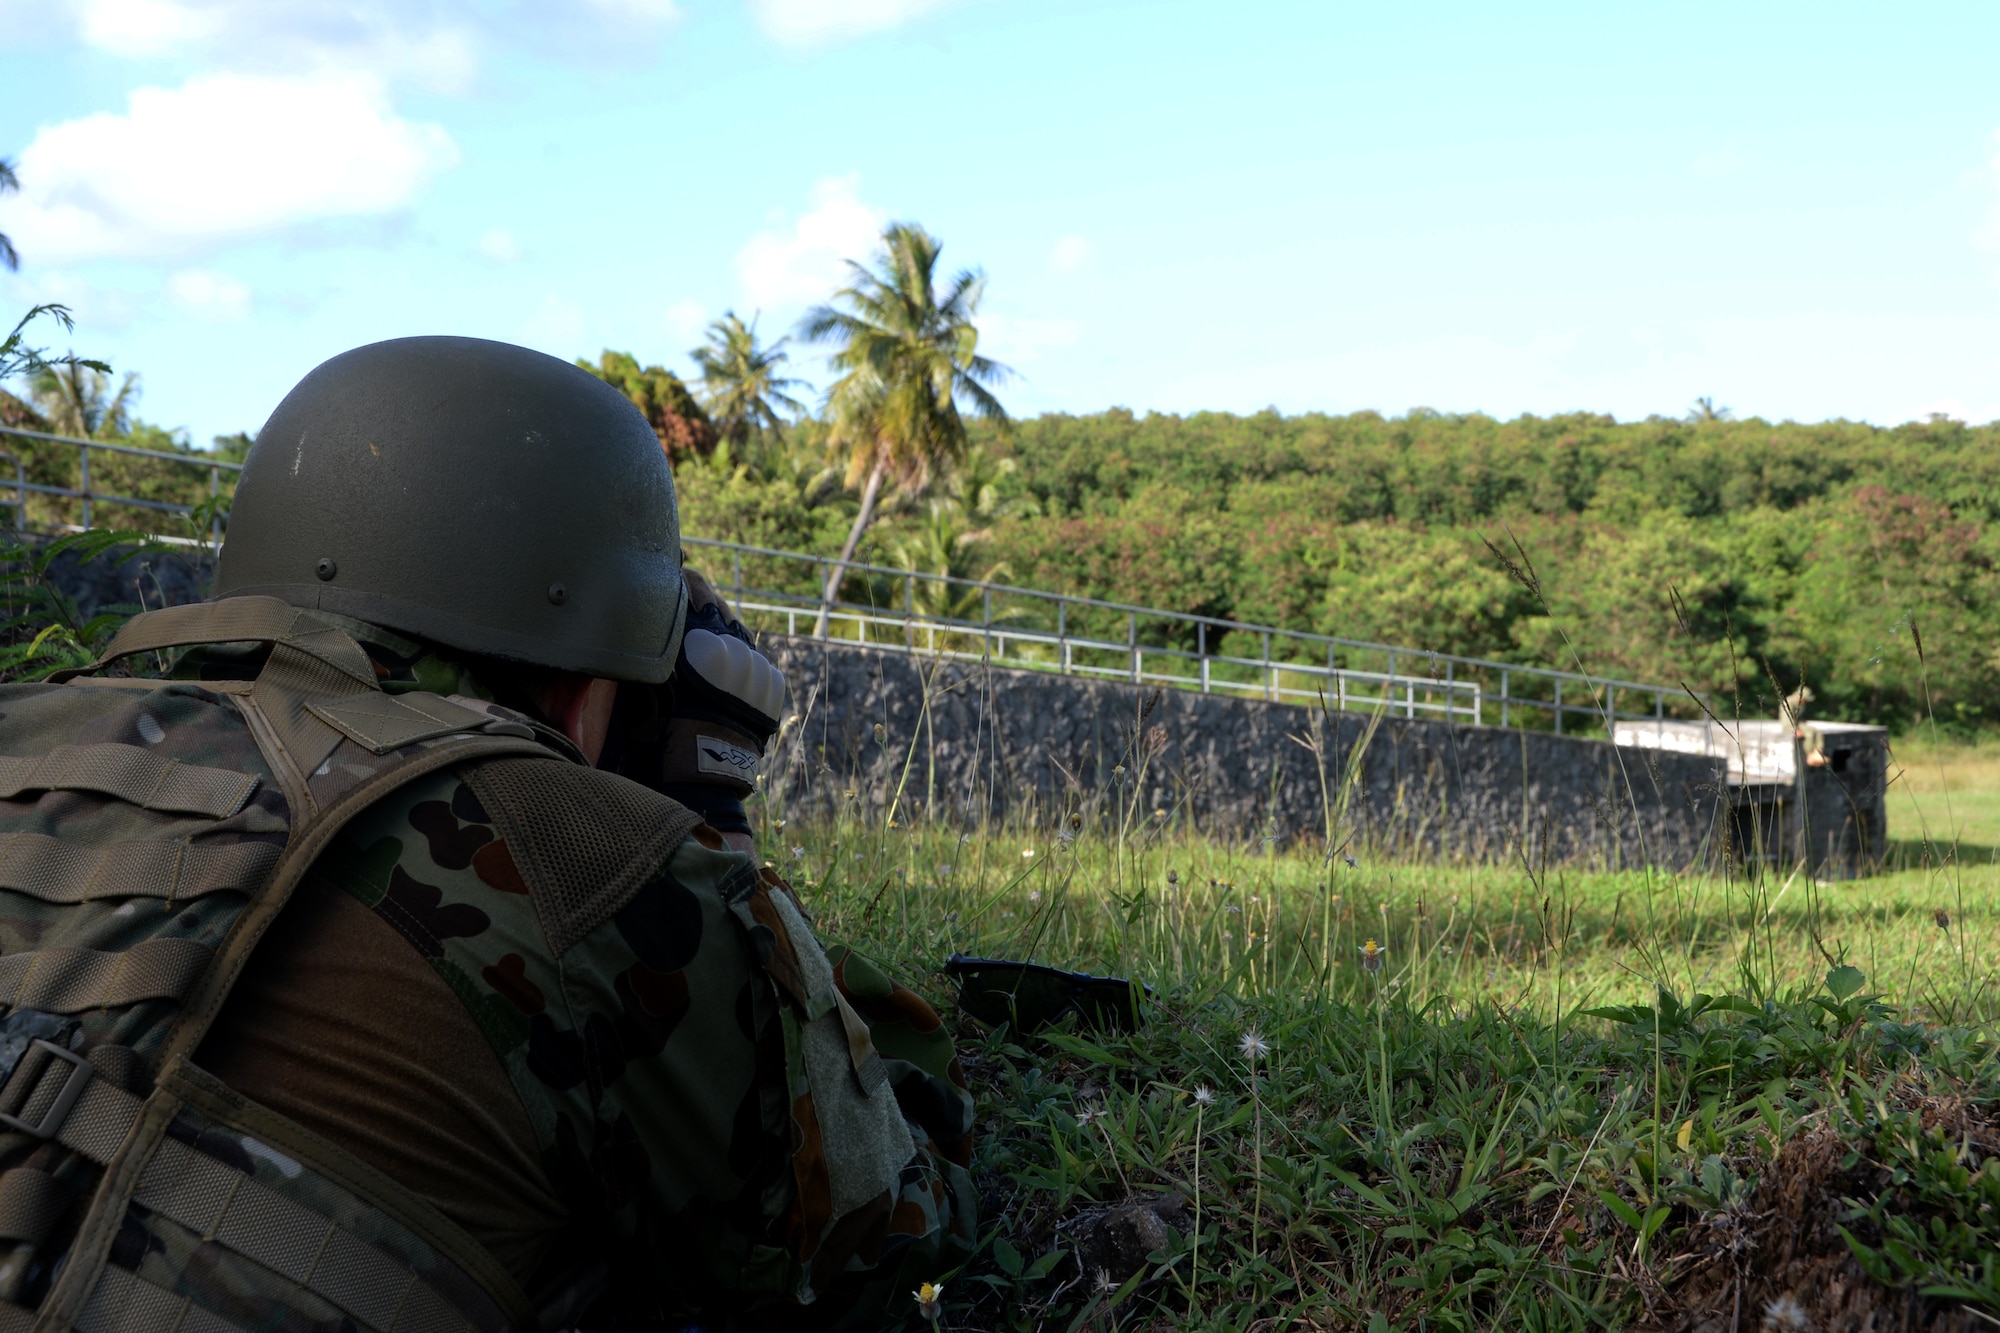 Royal Australian Air Force Flight Sergeant Dean Maher, One Security Forces Squadron Explosive Ordnance Disposal Flight senior NCO, looks at a training improvised explosive device through binoculars during Exercise Tri-Crab May 5, 2014, on Naval Base Guam. Tri-Crab is a biennial, multi-national EOD exercise designed to reinforce skillsets and strengthen interoperability among different countries. (U.S. Air Force photo by Airman 1st Class Amanda Morris/Released)